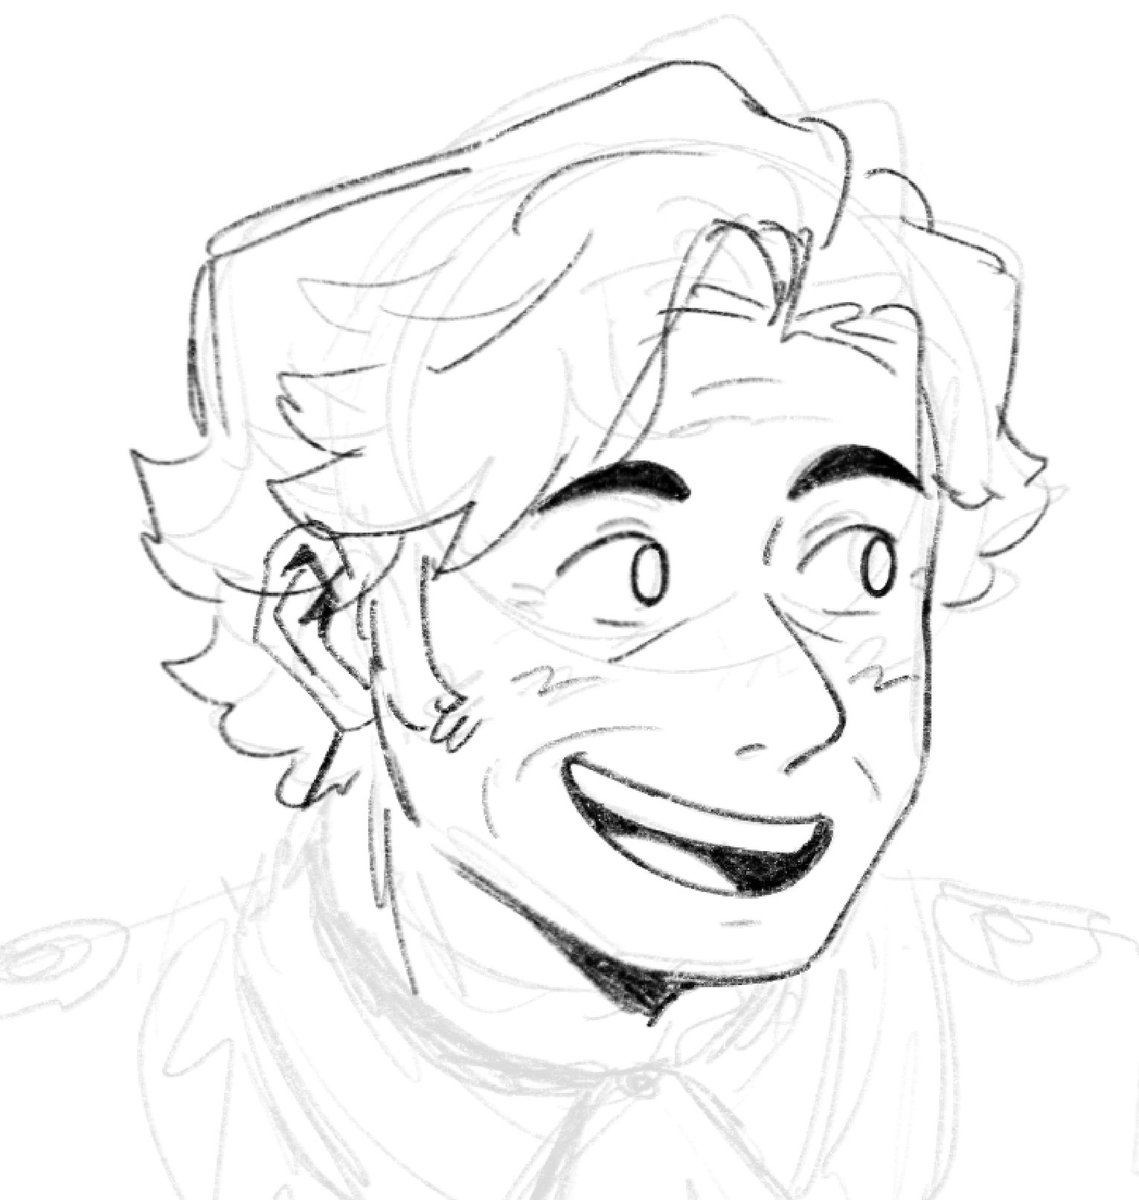 thanks rhys darby, ur swag looks and cartoon hair are soooo fun to draw. ive been sketching this guy for the past three days 